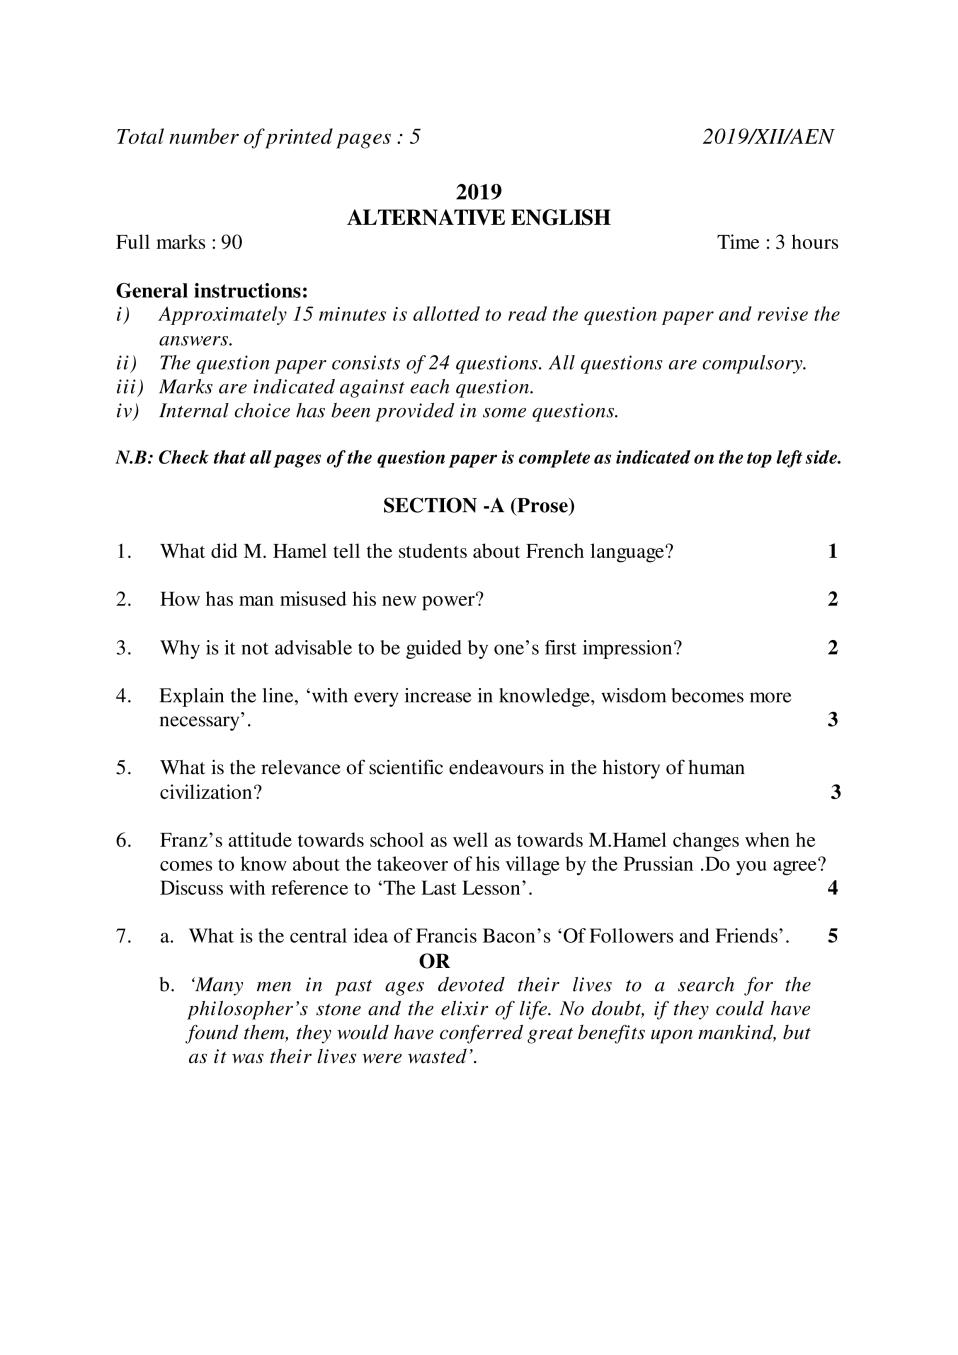 NBSE Class 12 Question Paper 2019 for Fund of Alternative English - Page 1